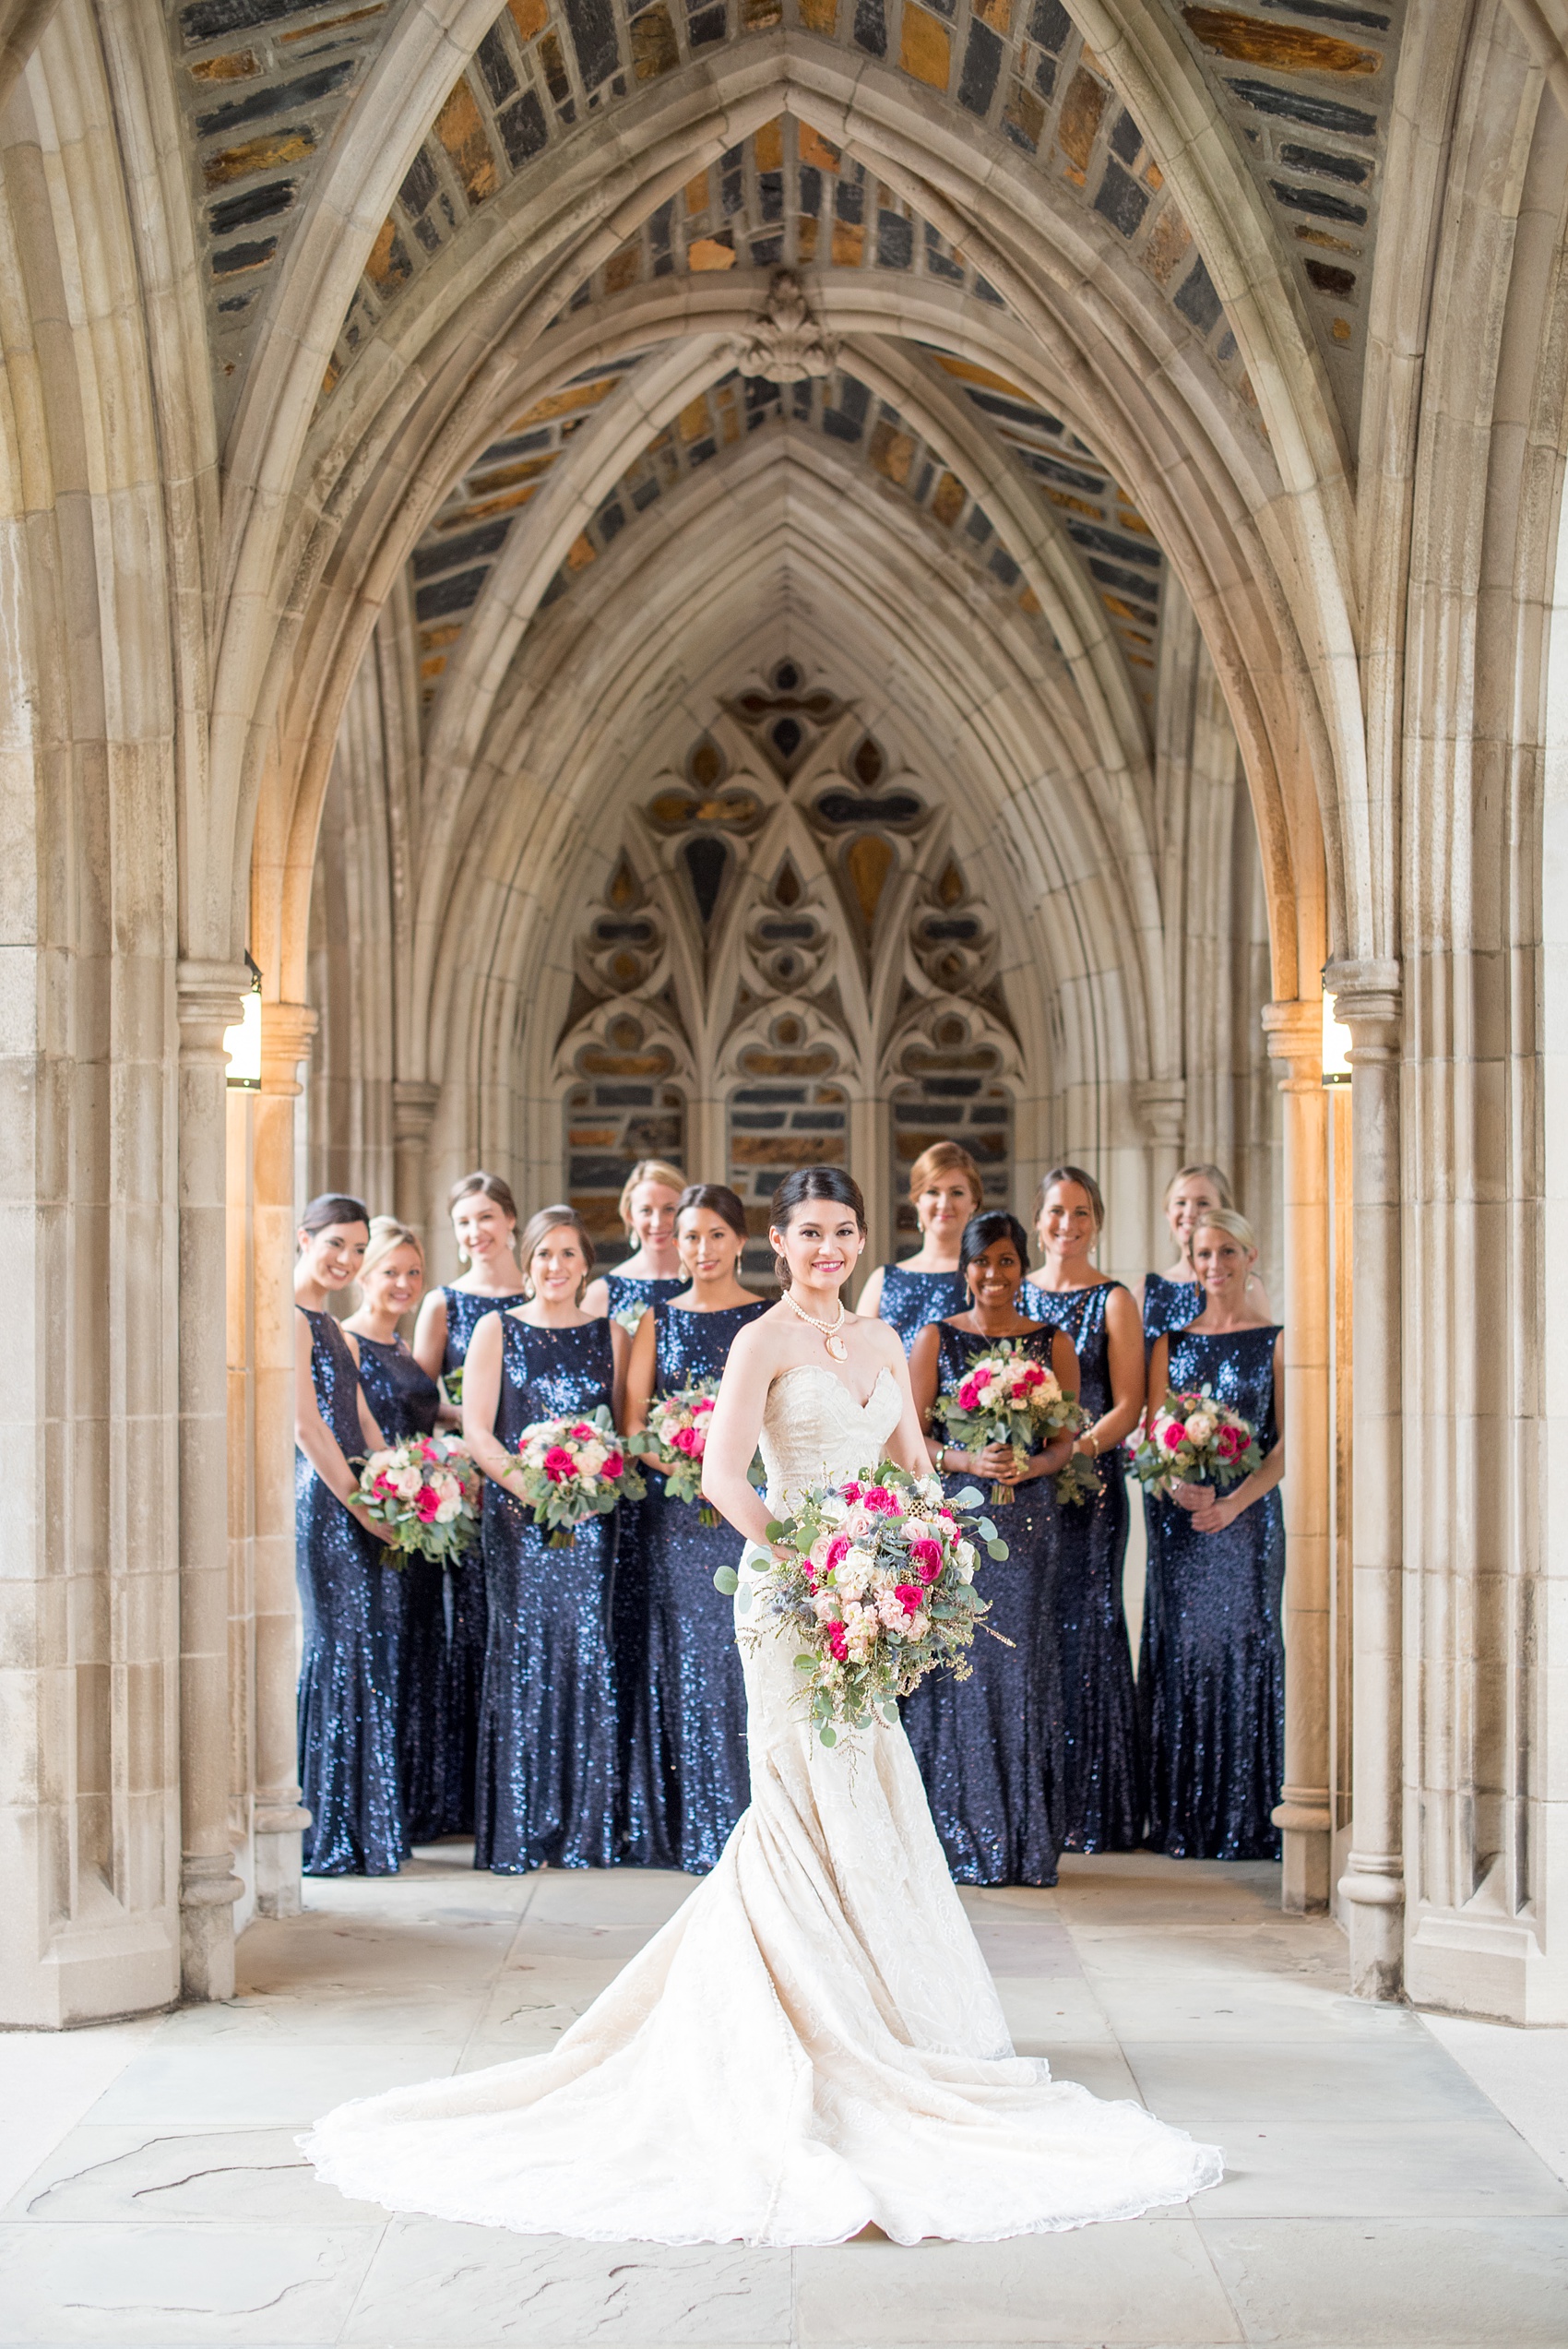 Mikkel Paige Photography photo of a wedding in Chapel Hill at Duke Chapel. Picture of the bridal party in navy blue sequins gowns and the bride in a portrait under the gothic arcade of the church.